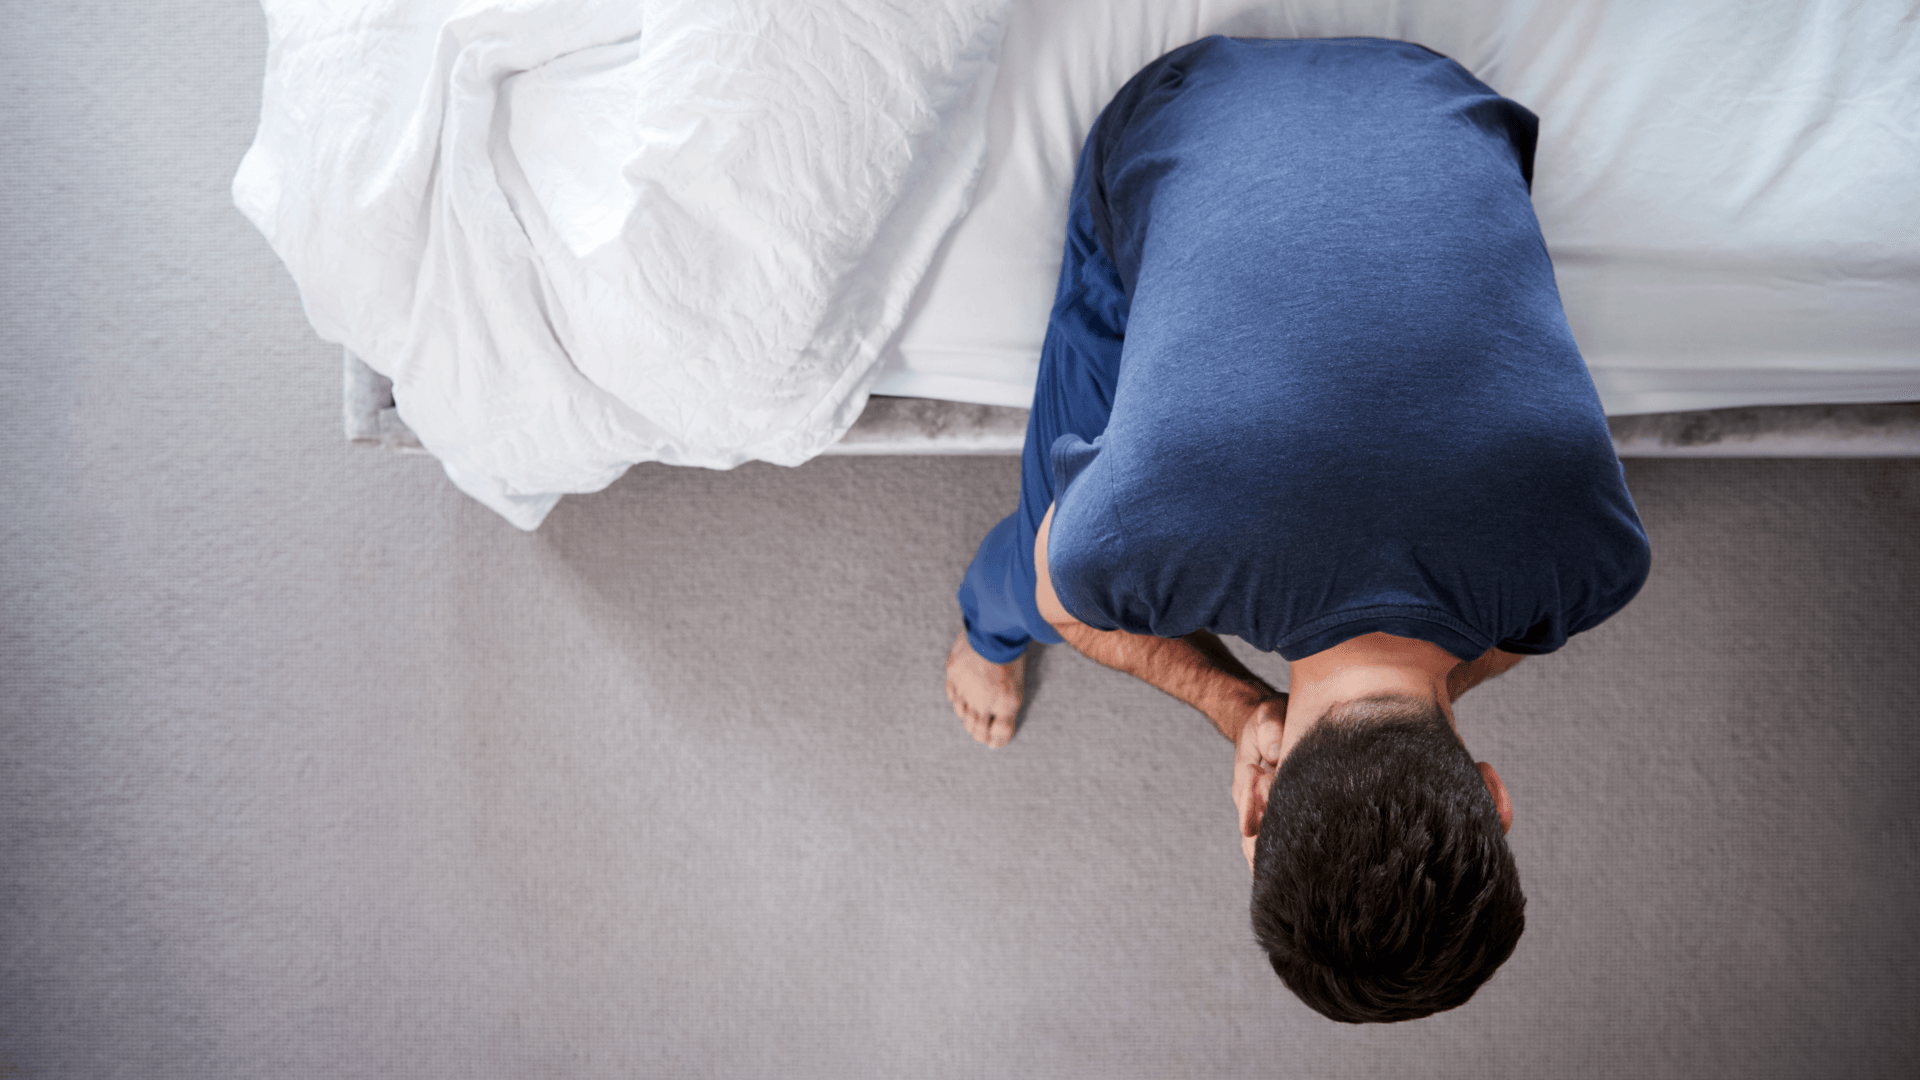 An overhead shot of a man sat on a bed, his head in his hands. He is wearing a blue shirt.